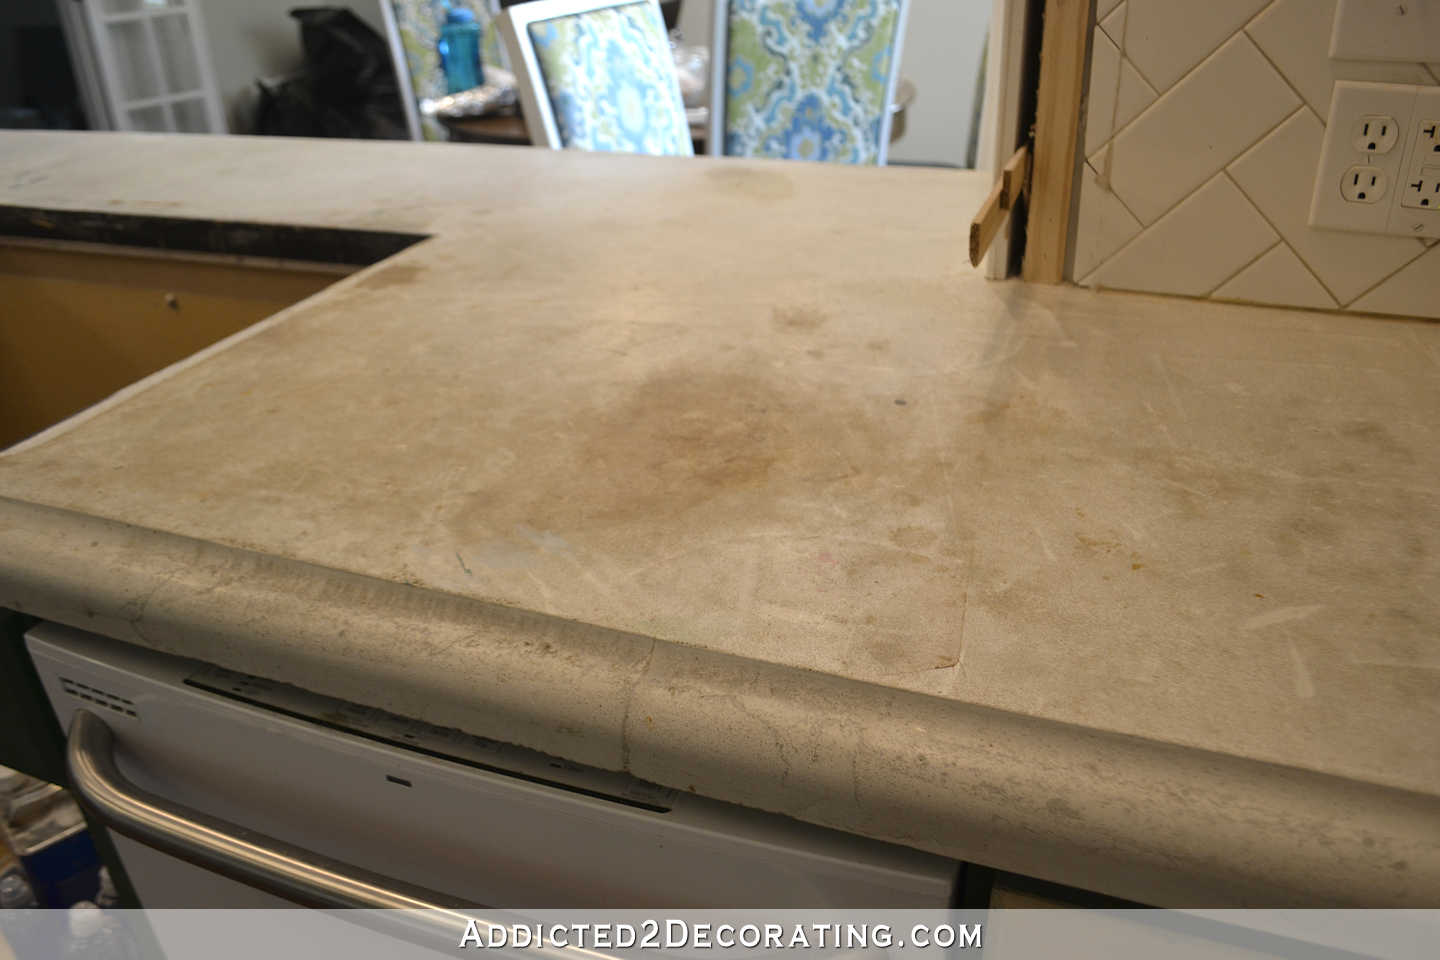 Refinishing My Concrete Kitchen Countertops Part 1 Of 3 Addicted 2 Decorating